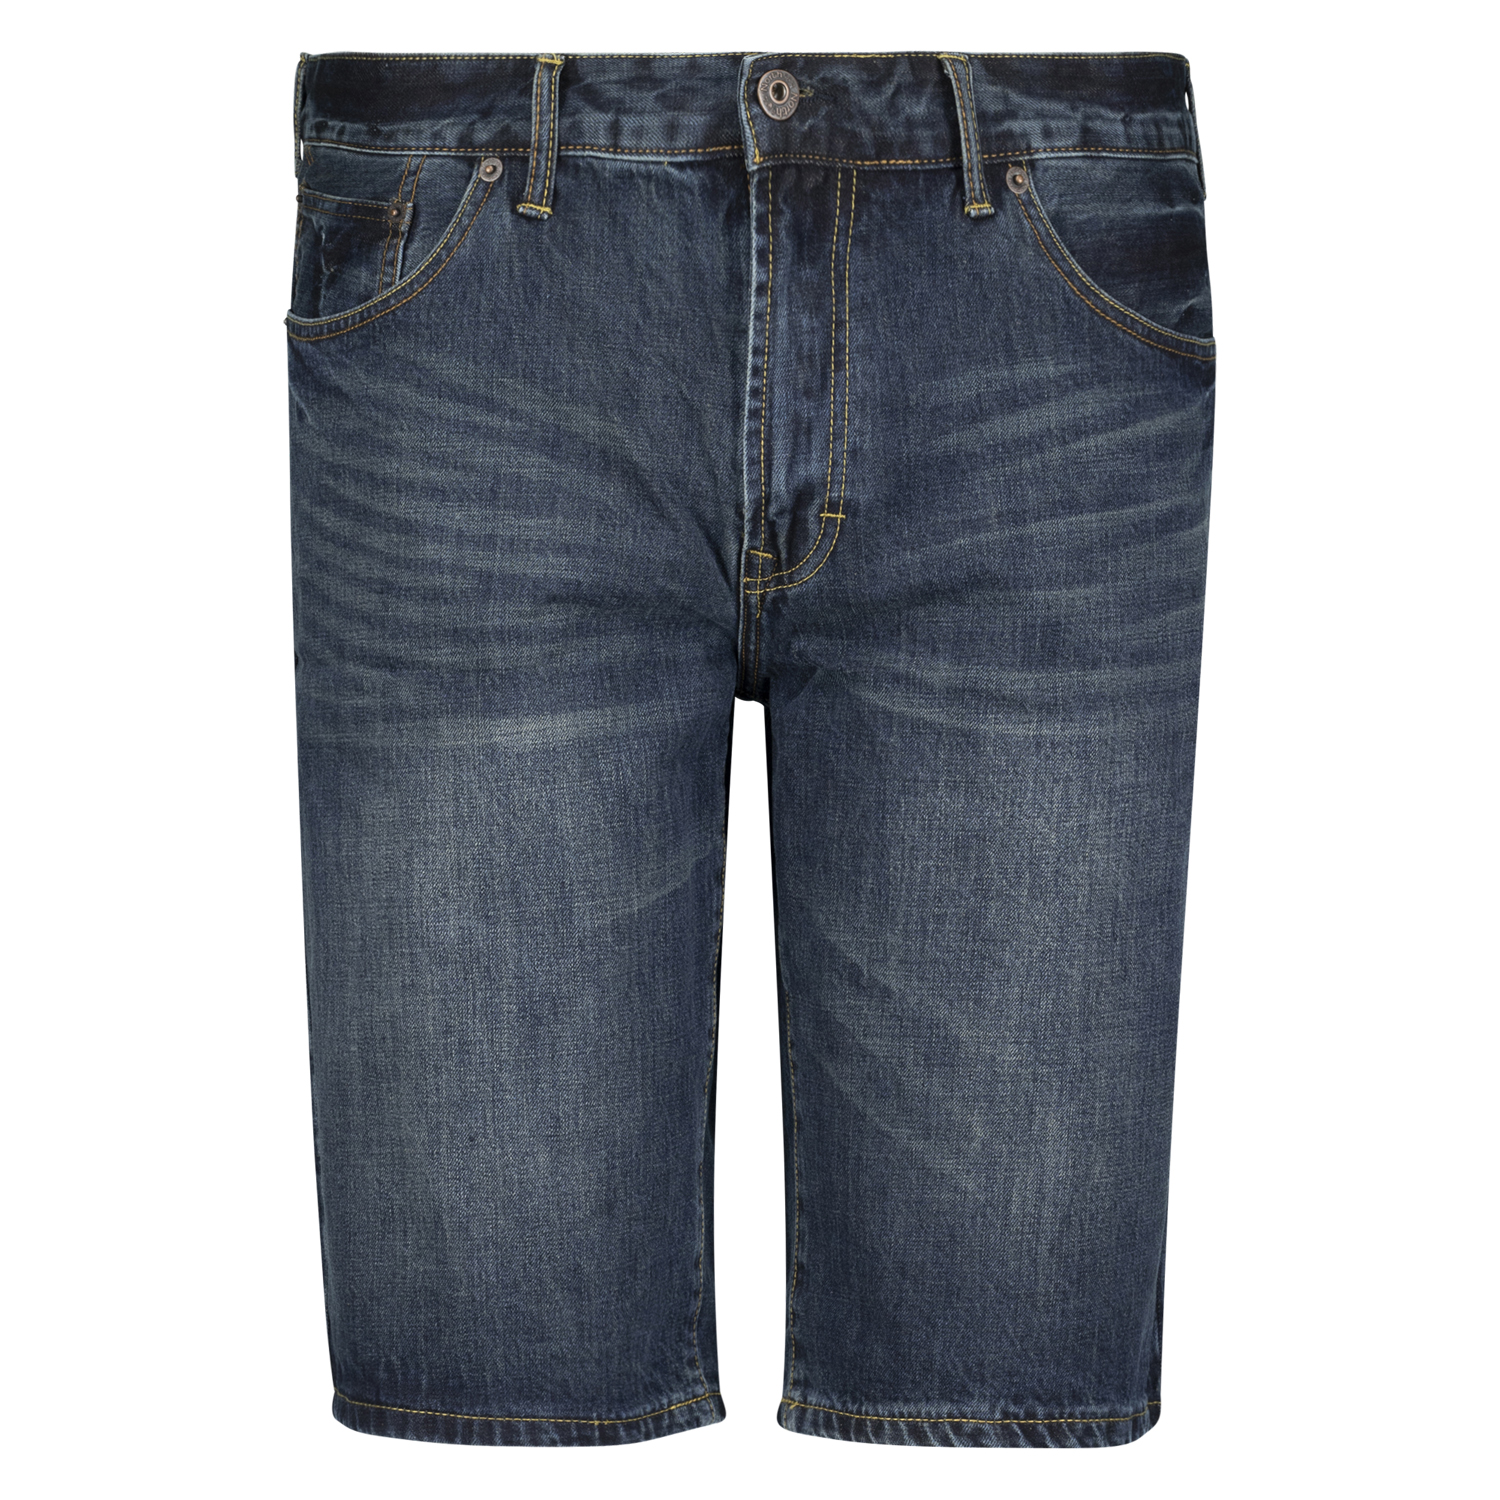 Blue denim long shorts for men by North 56°4 in oversizes up to W70